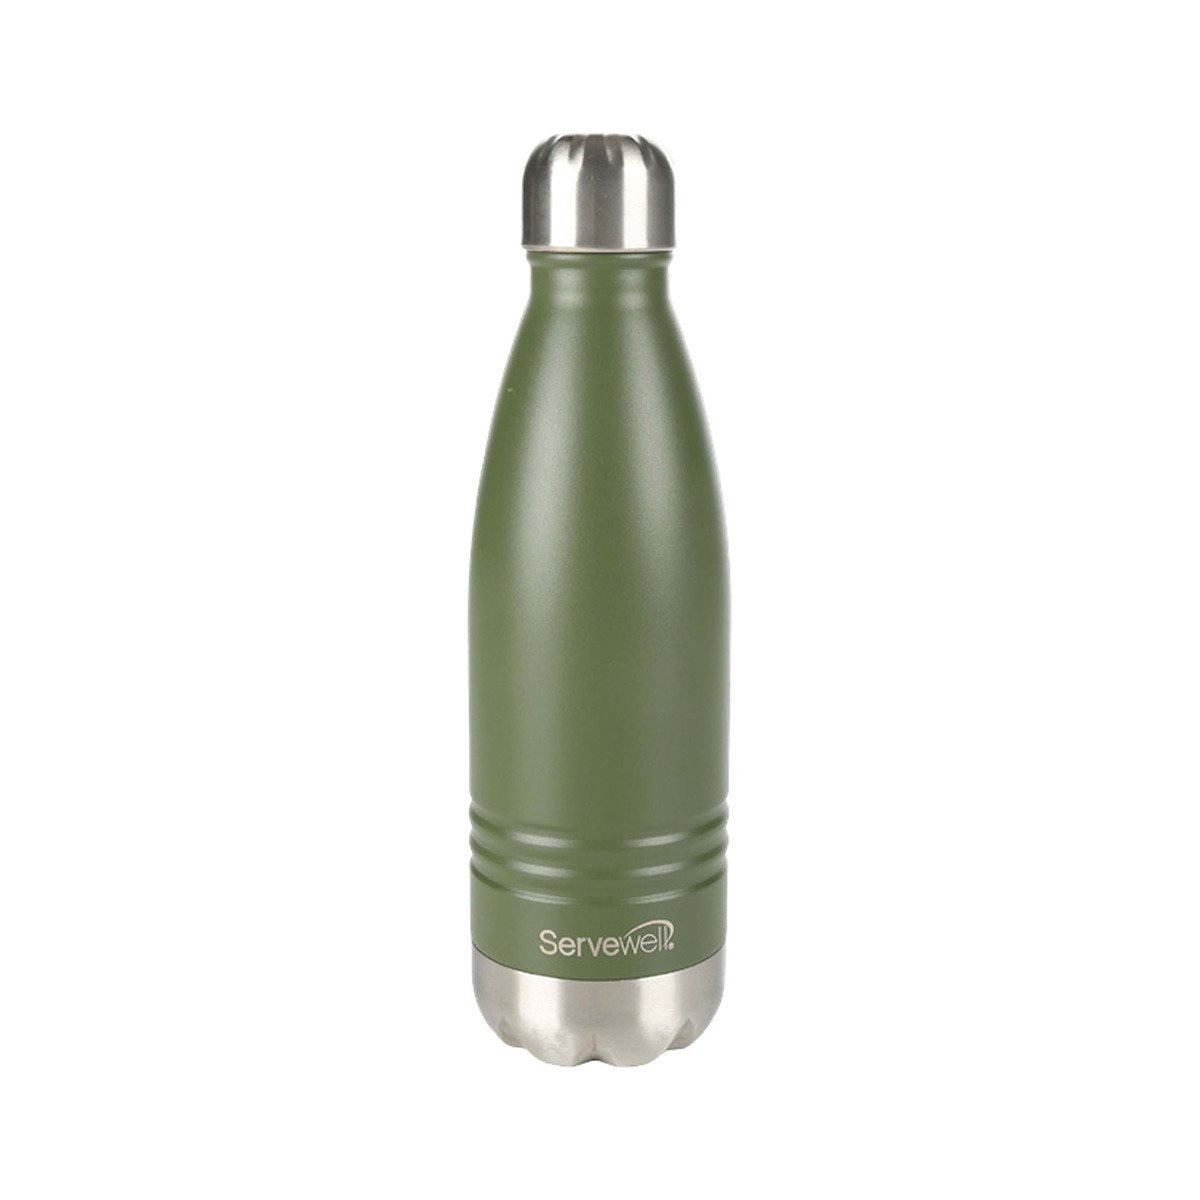 Serve Well Stainless Steel Double Wall Vacuum Bottle 500ml Indus DW15